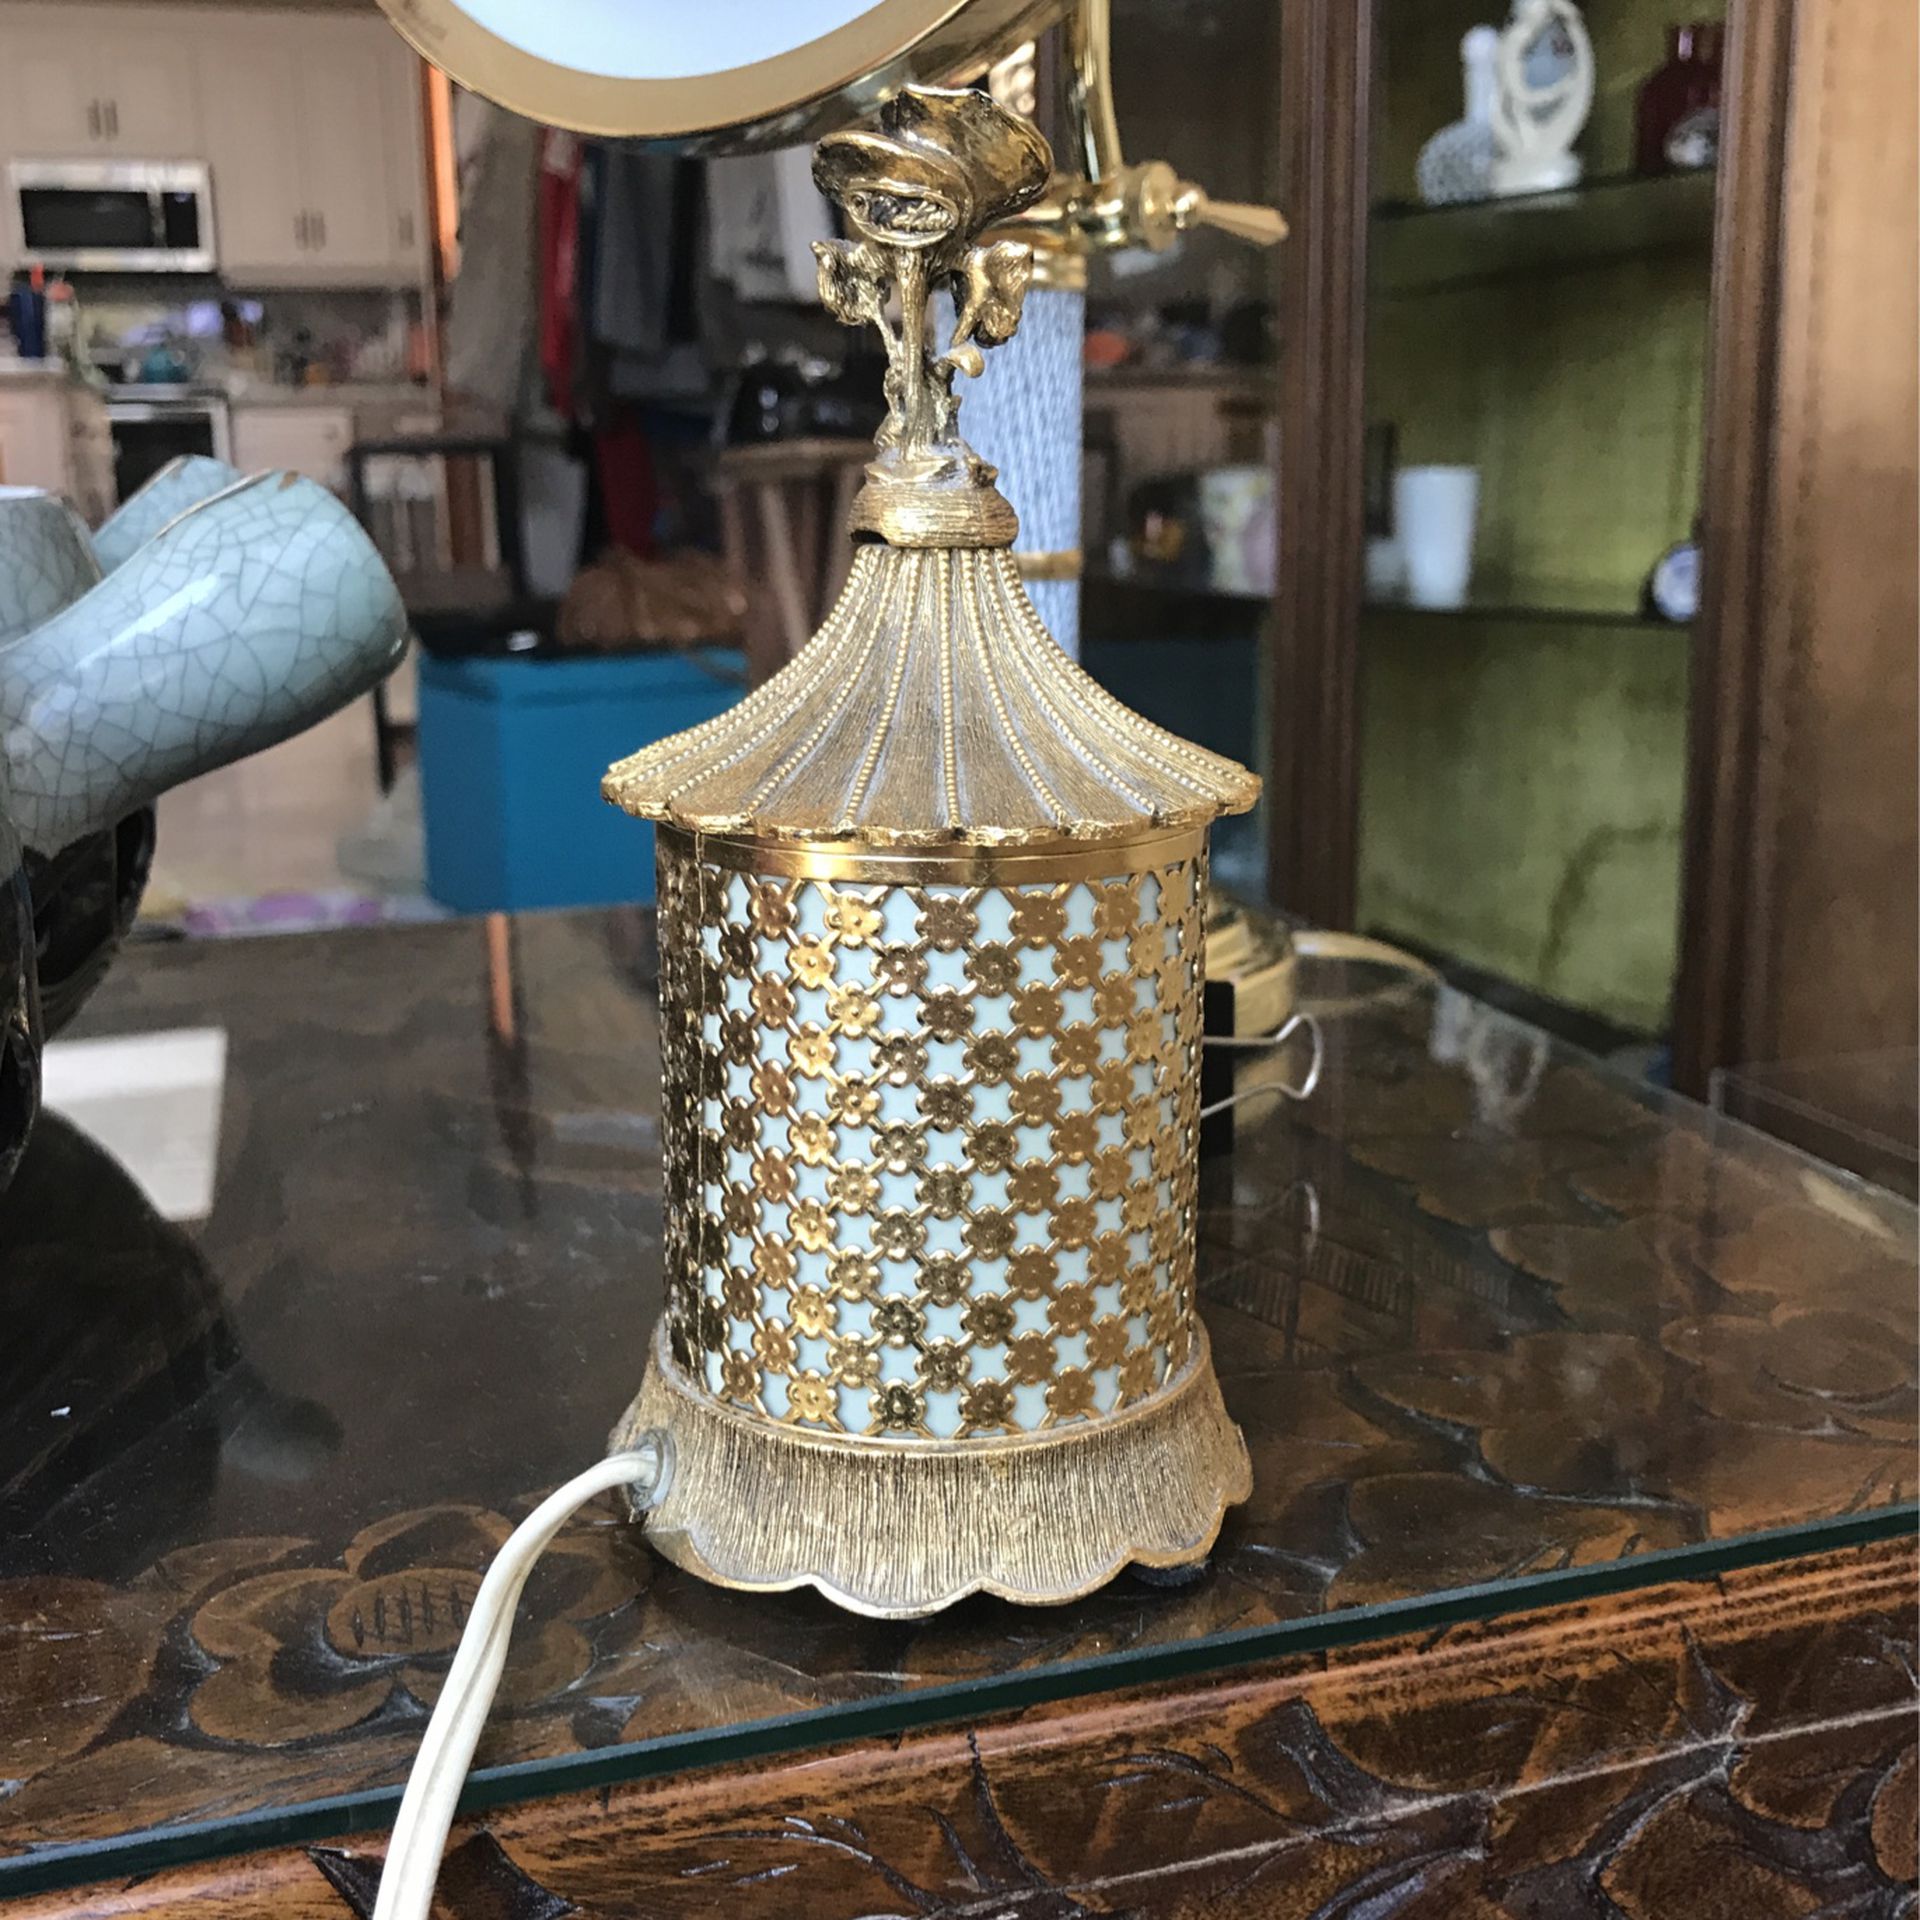   VINTAGE MATSON GOLD TONE ELECTRIC VANITY LIGHT LAMP W/ ORNATE FINIAL TOP-WORKS